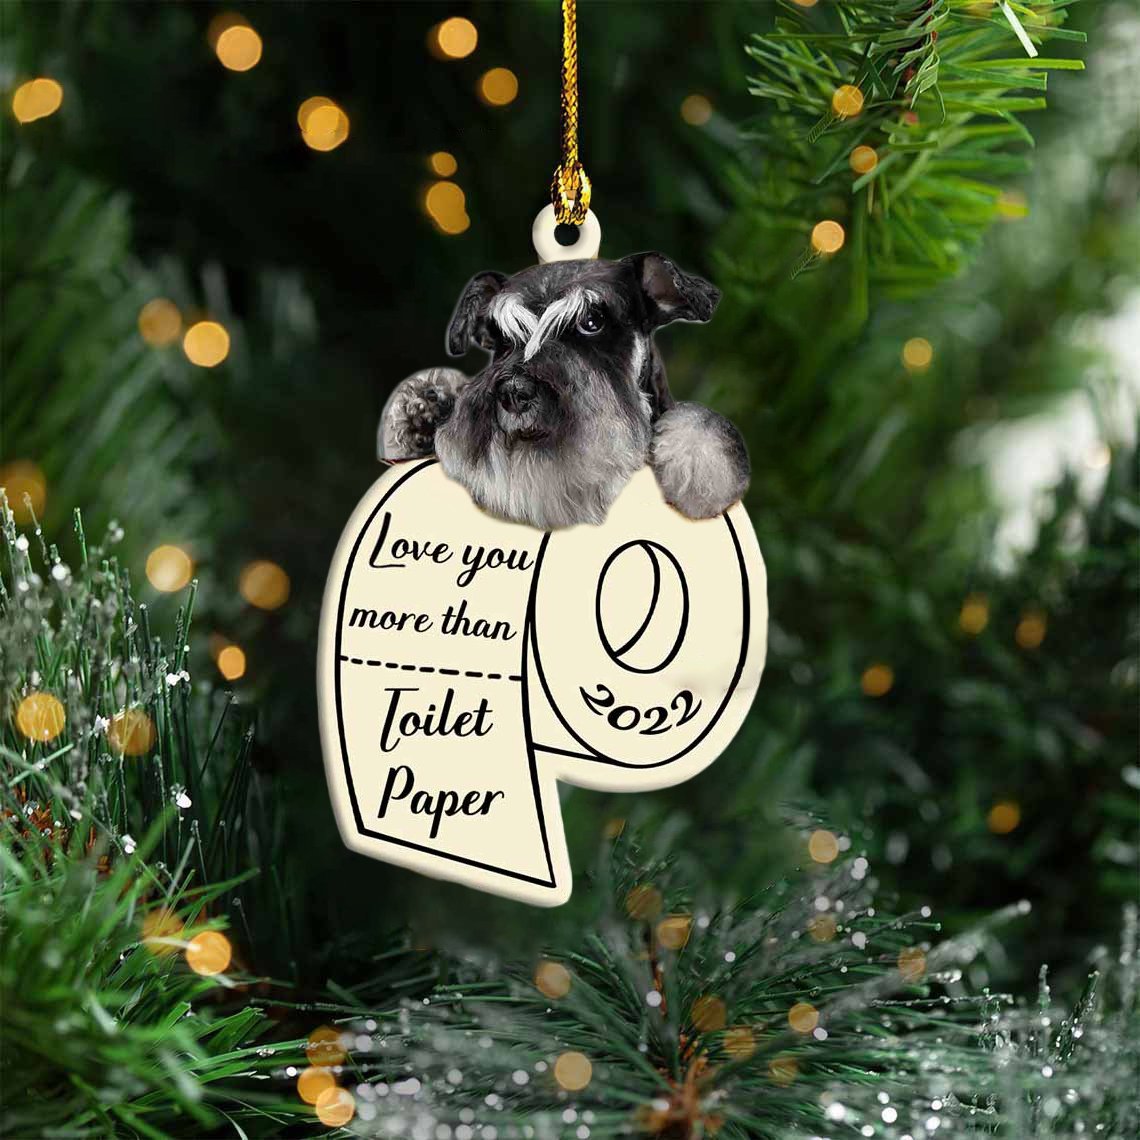 Schnauzer Love You More Than Toilet Paper 2022 Hanging Ornament